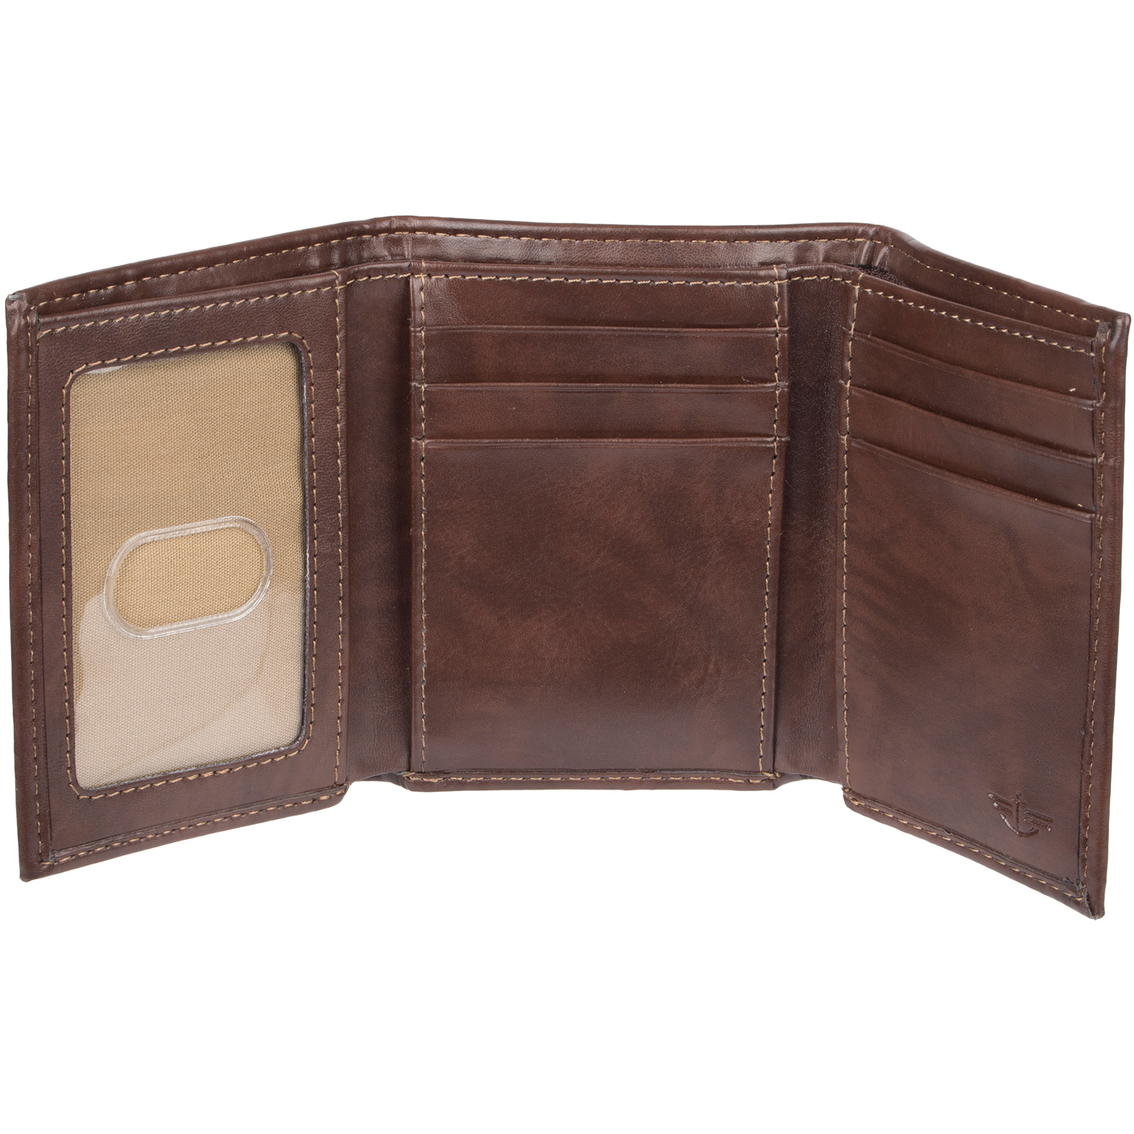 Dockers Rfid Trifold Wallet | Wallets | Clothing & Accessories | Shop ...